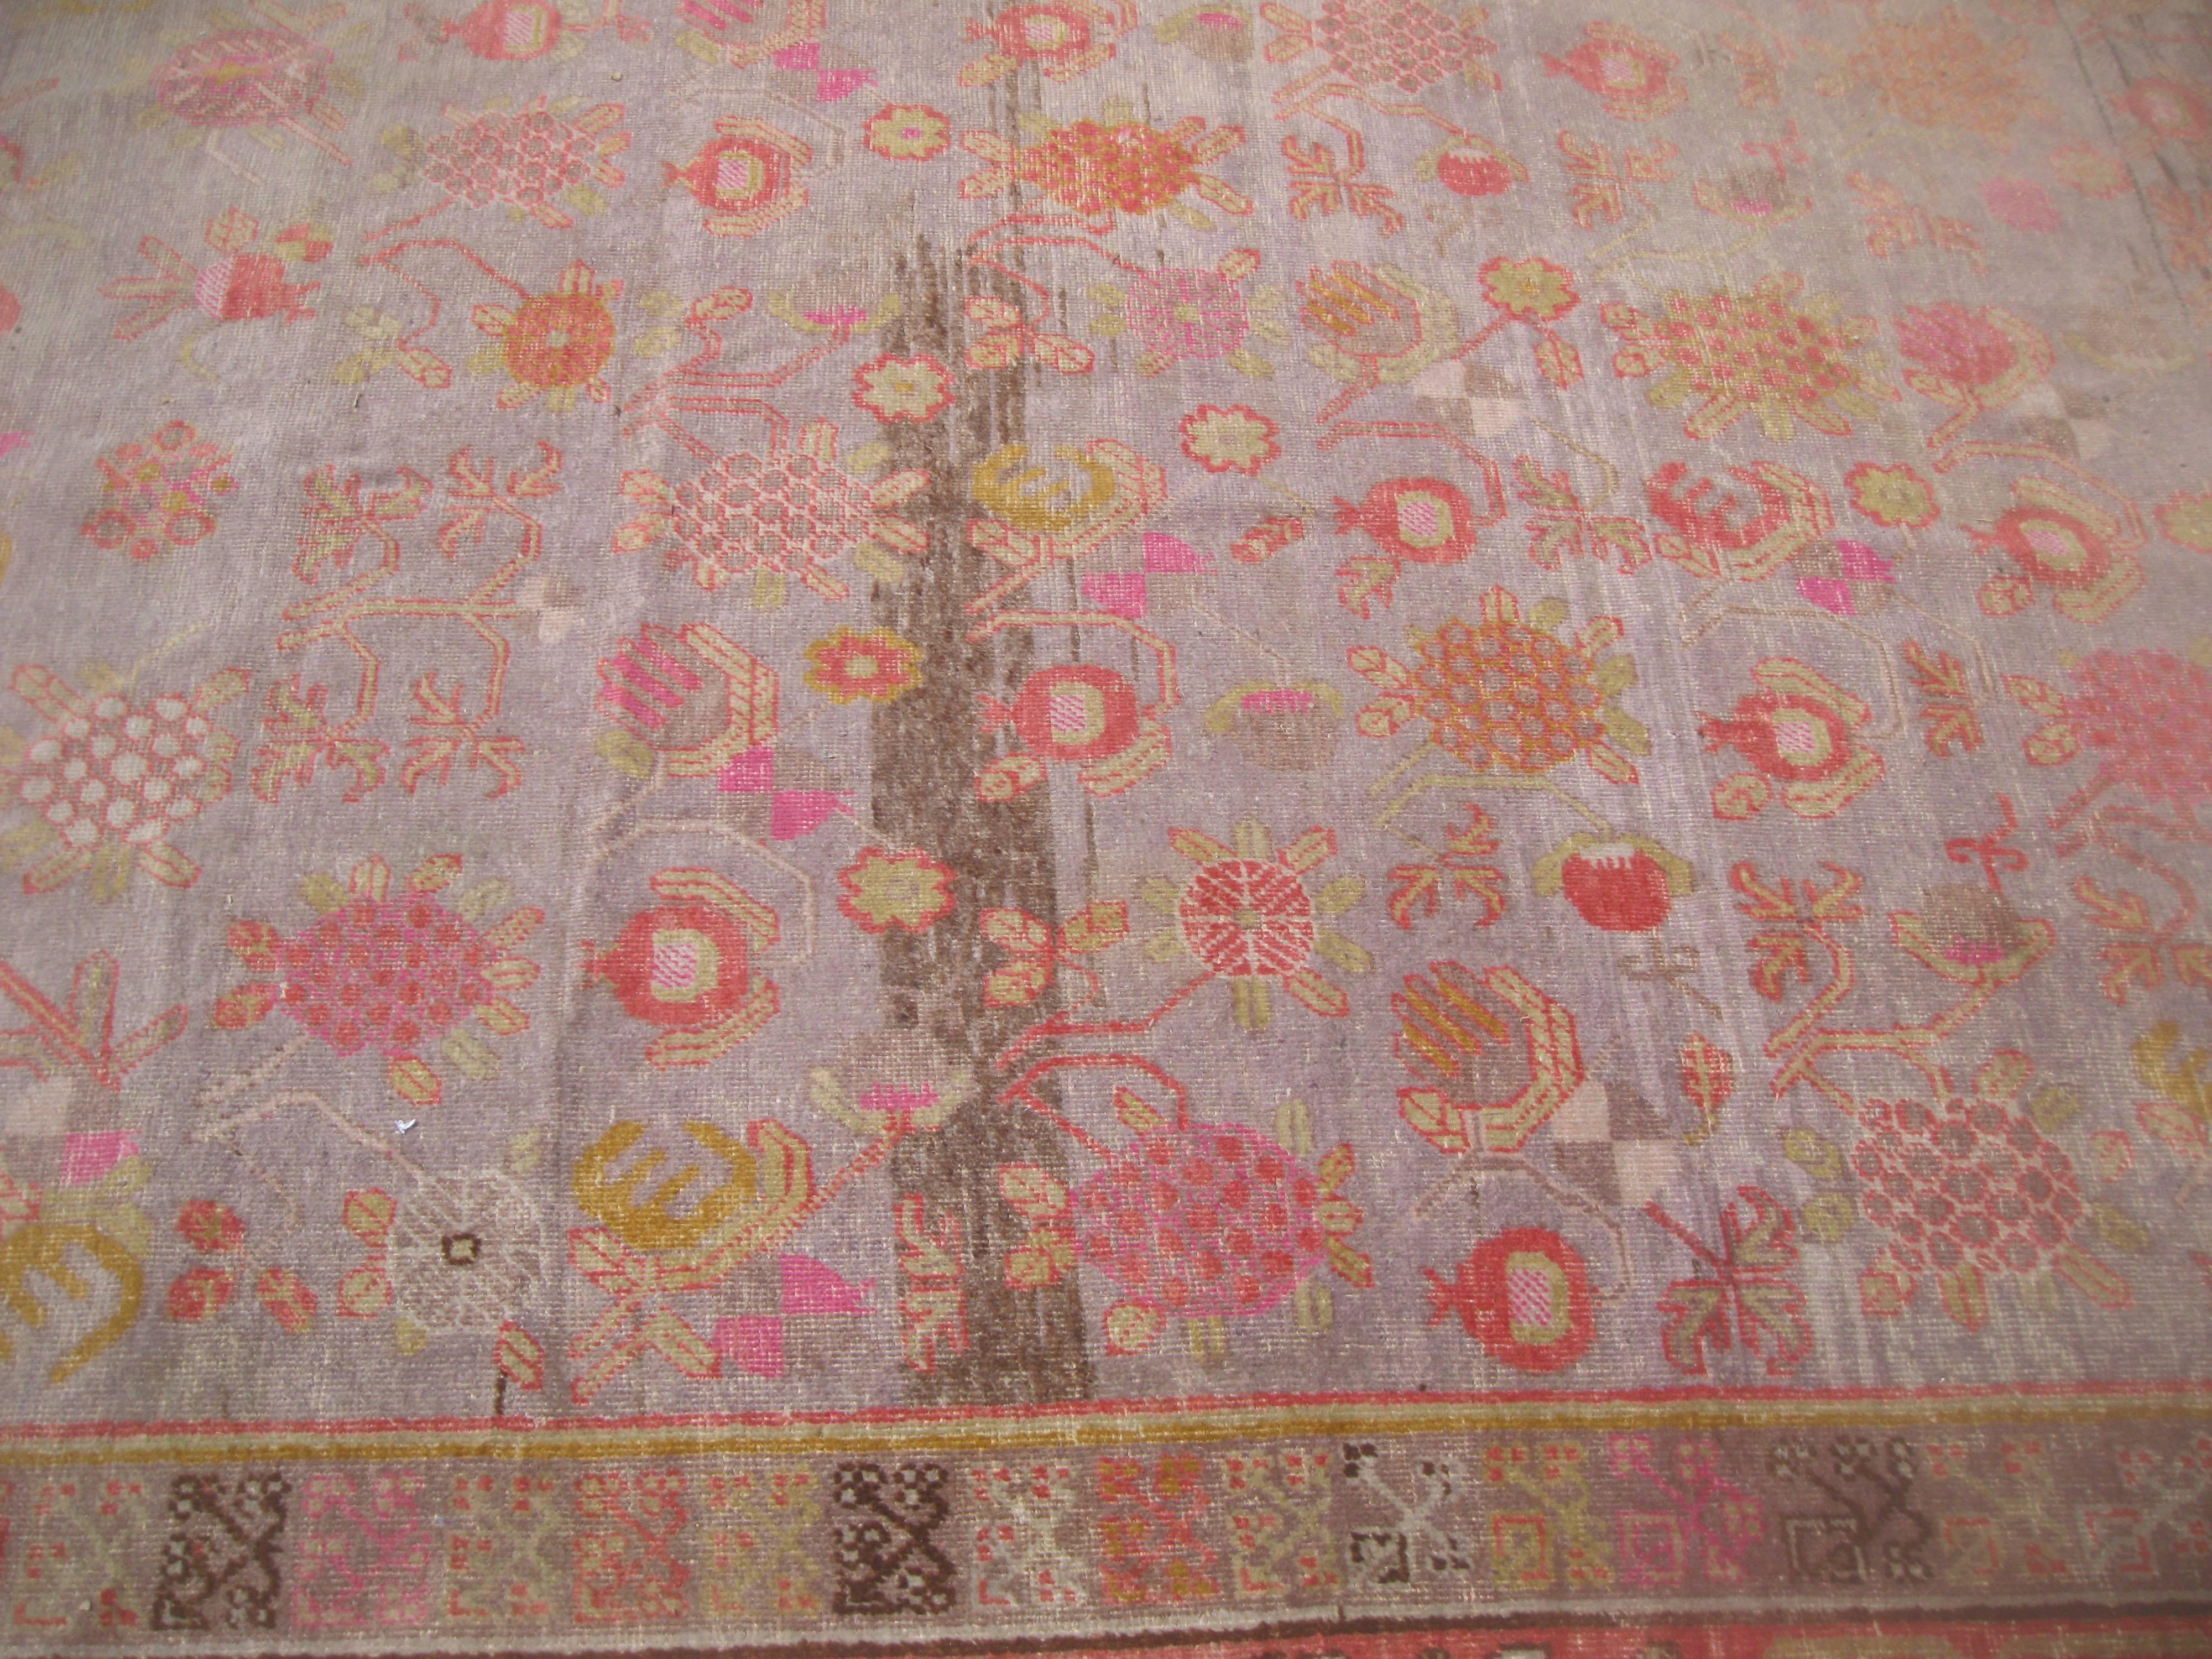 Hand-Woven Antique Khotan Rug with Eight Band Border in Browns and Oranges For Sale